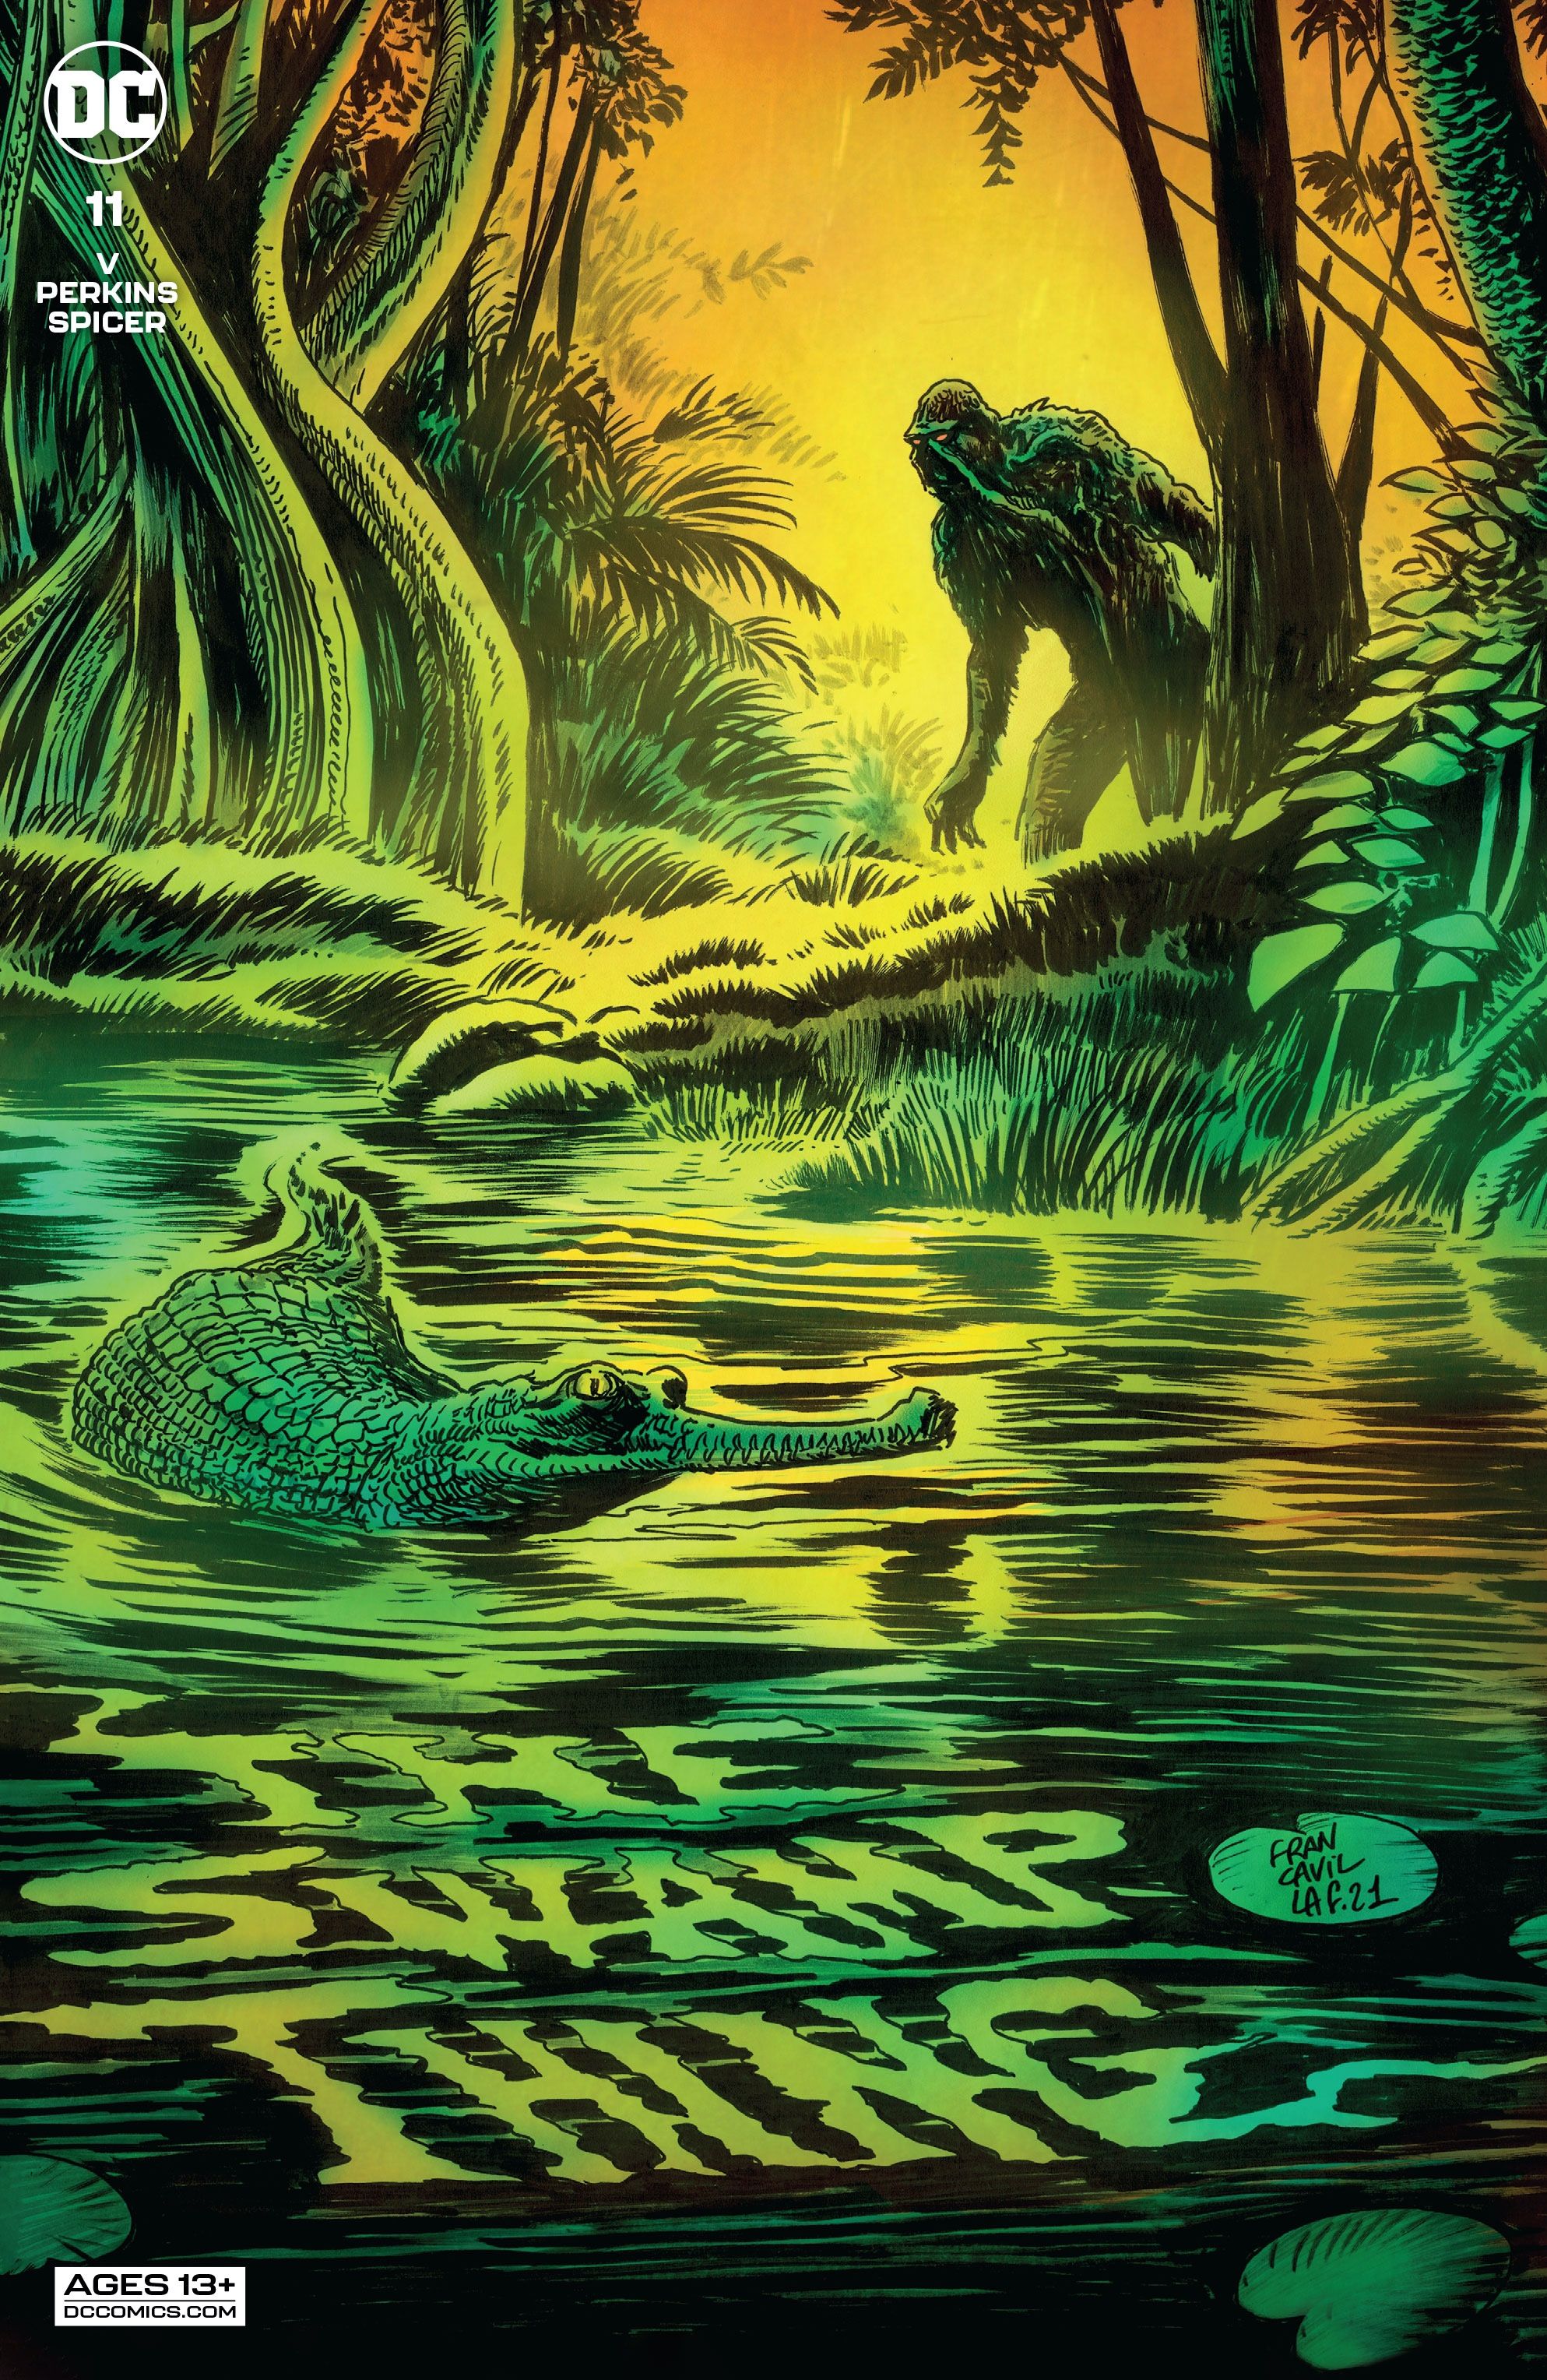 The Swamp Thing 11 Preview Variant Cover